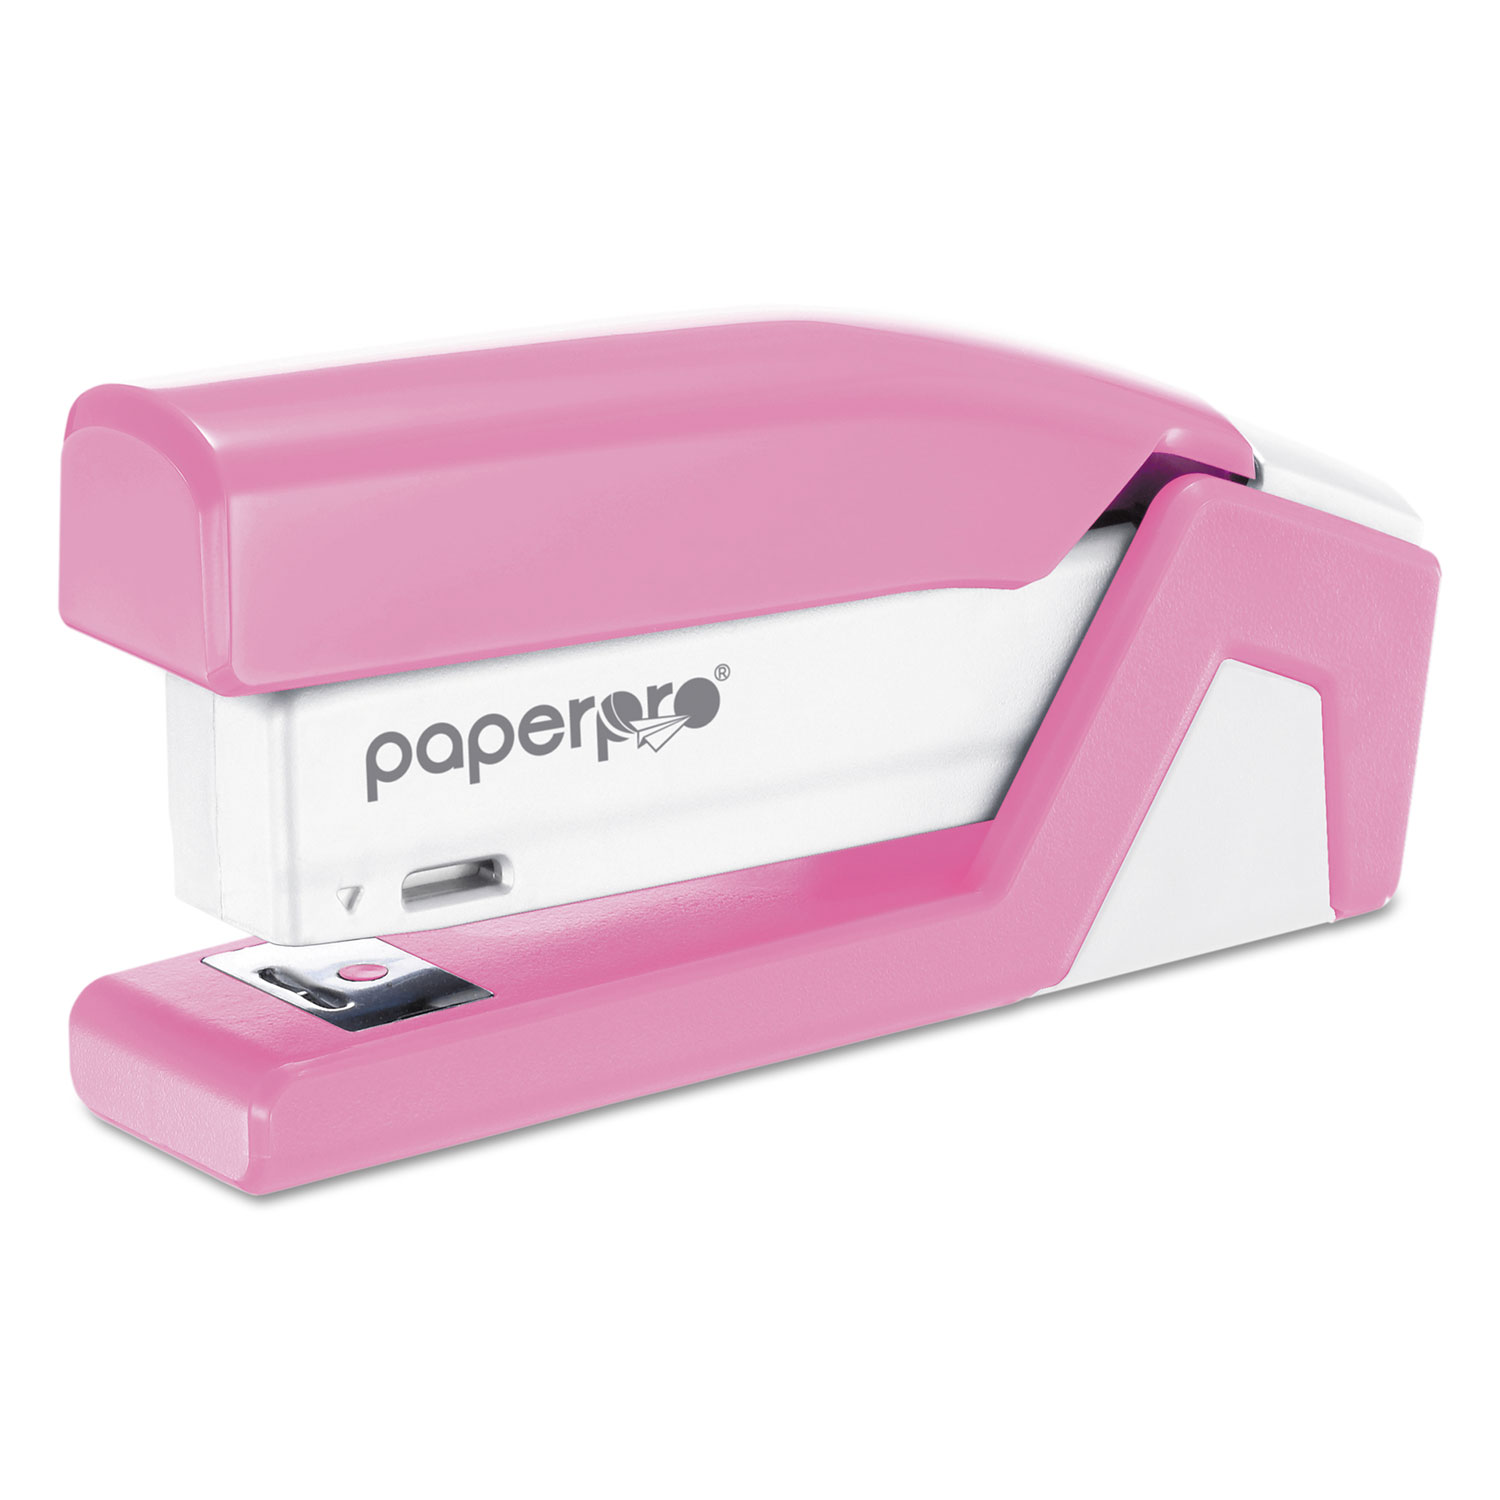  Bostitch PPR1588 InCourage Spring-Powered Compact Stapler, 20-Sheet Capacity, Pink/White (ACI1588) 